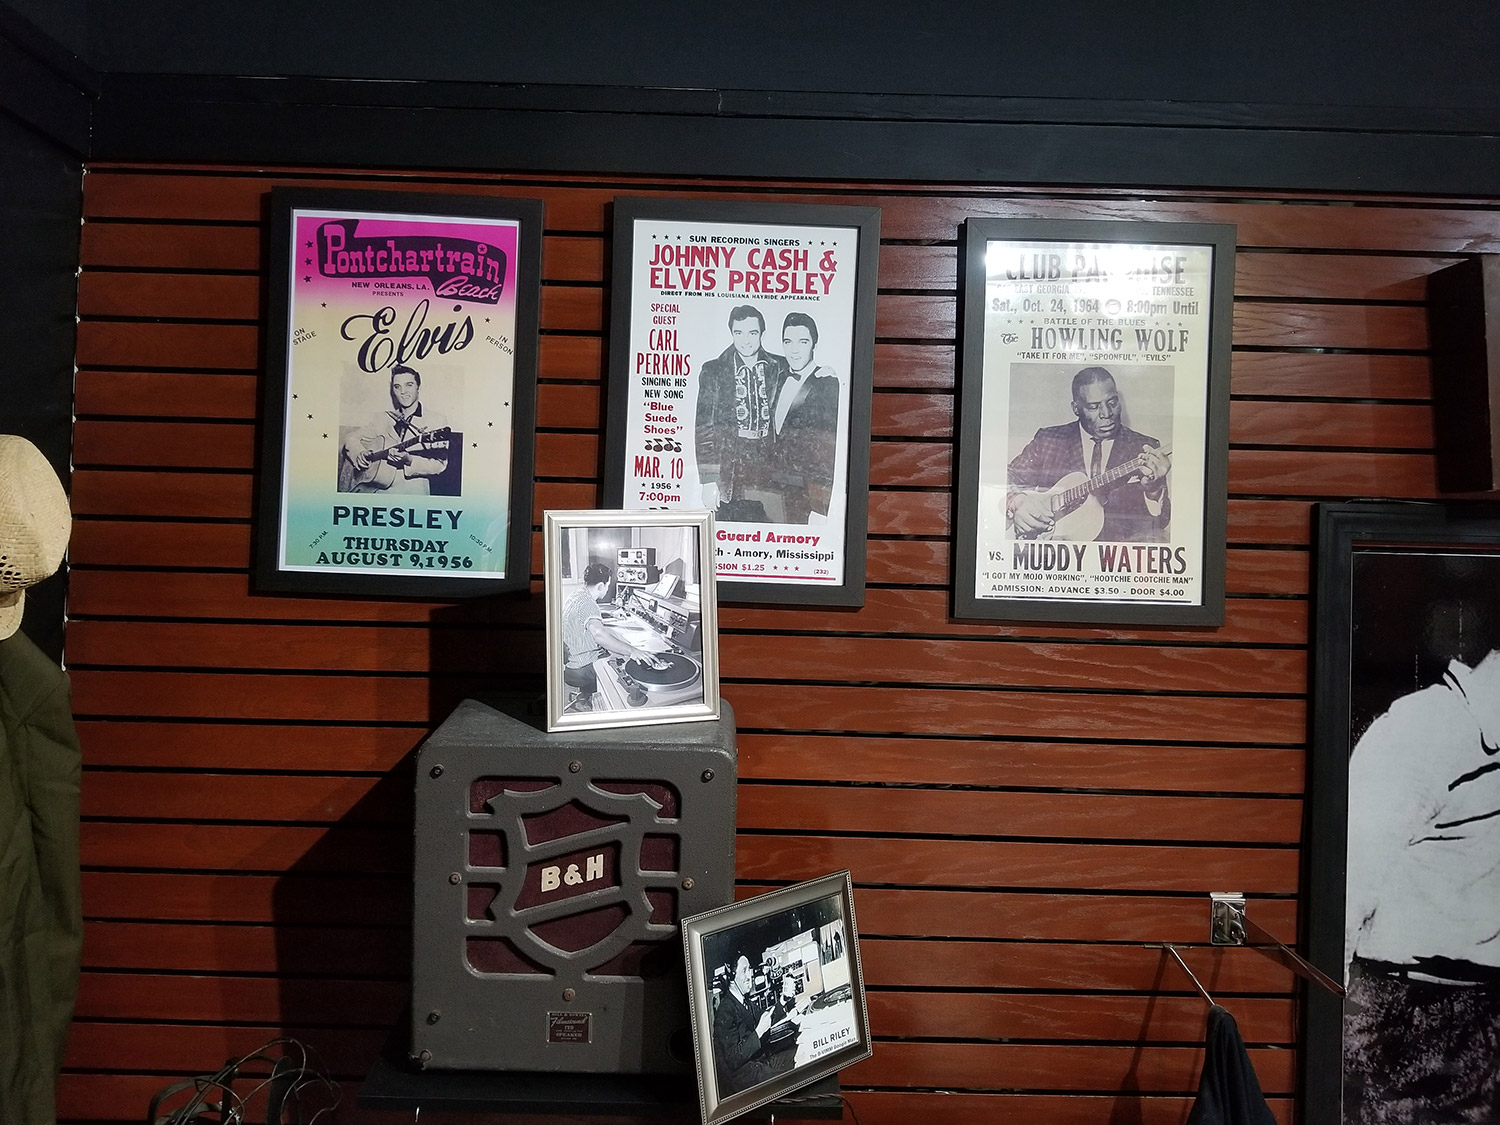 posters of musicians and photos on display